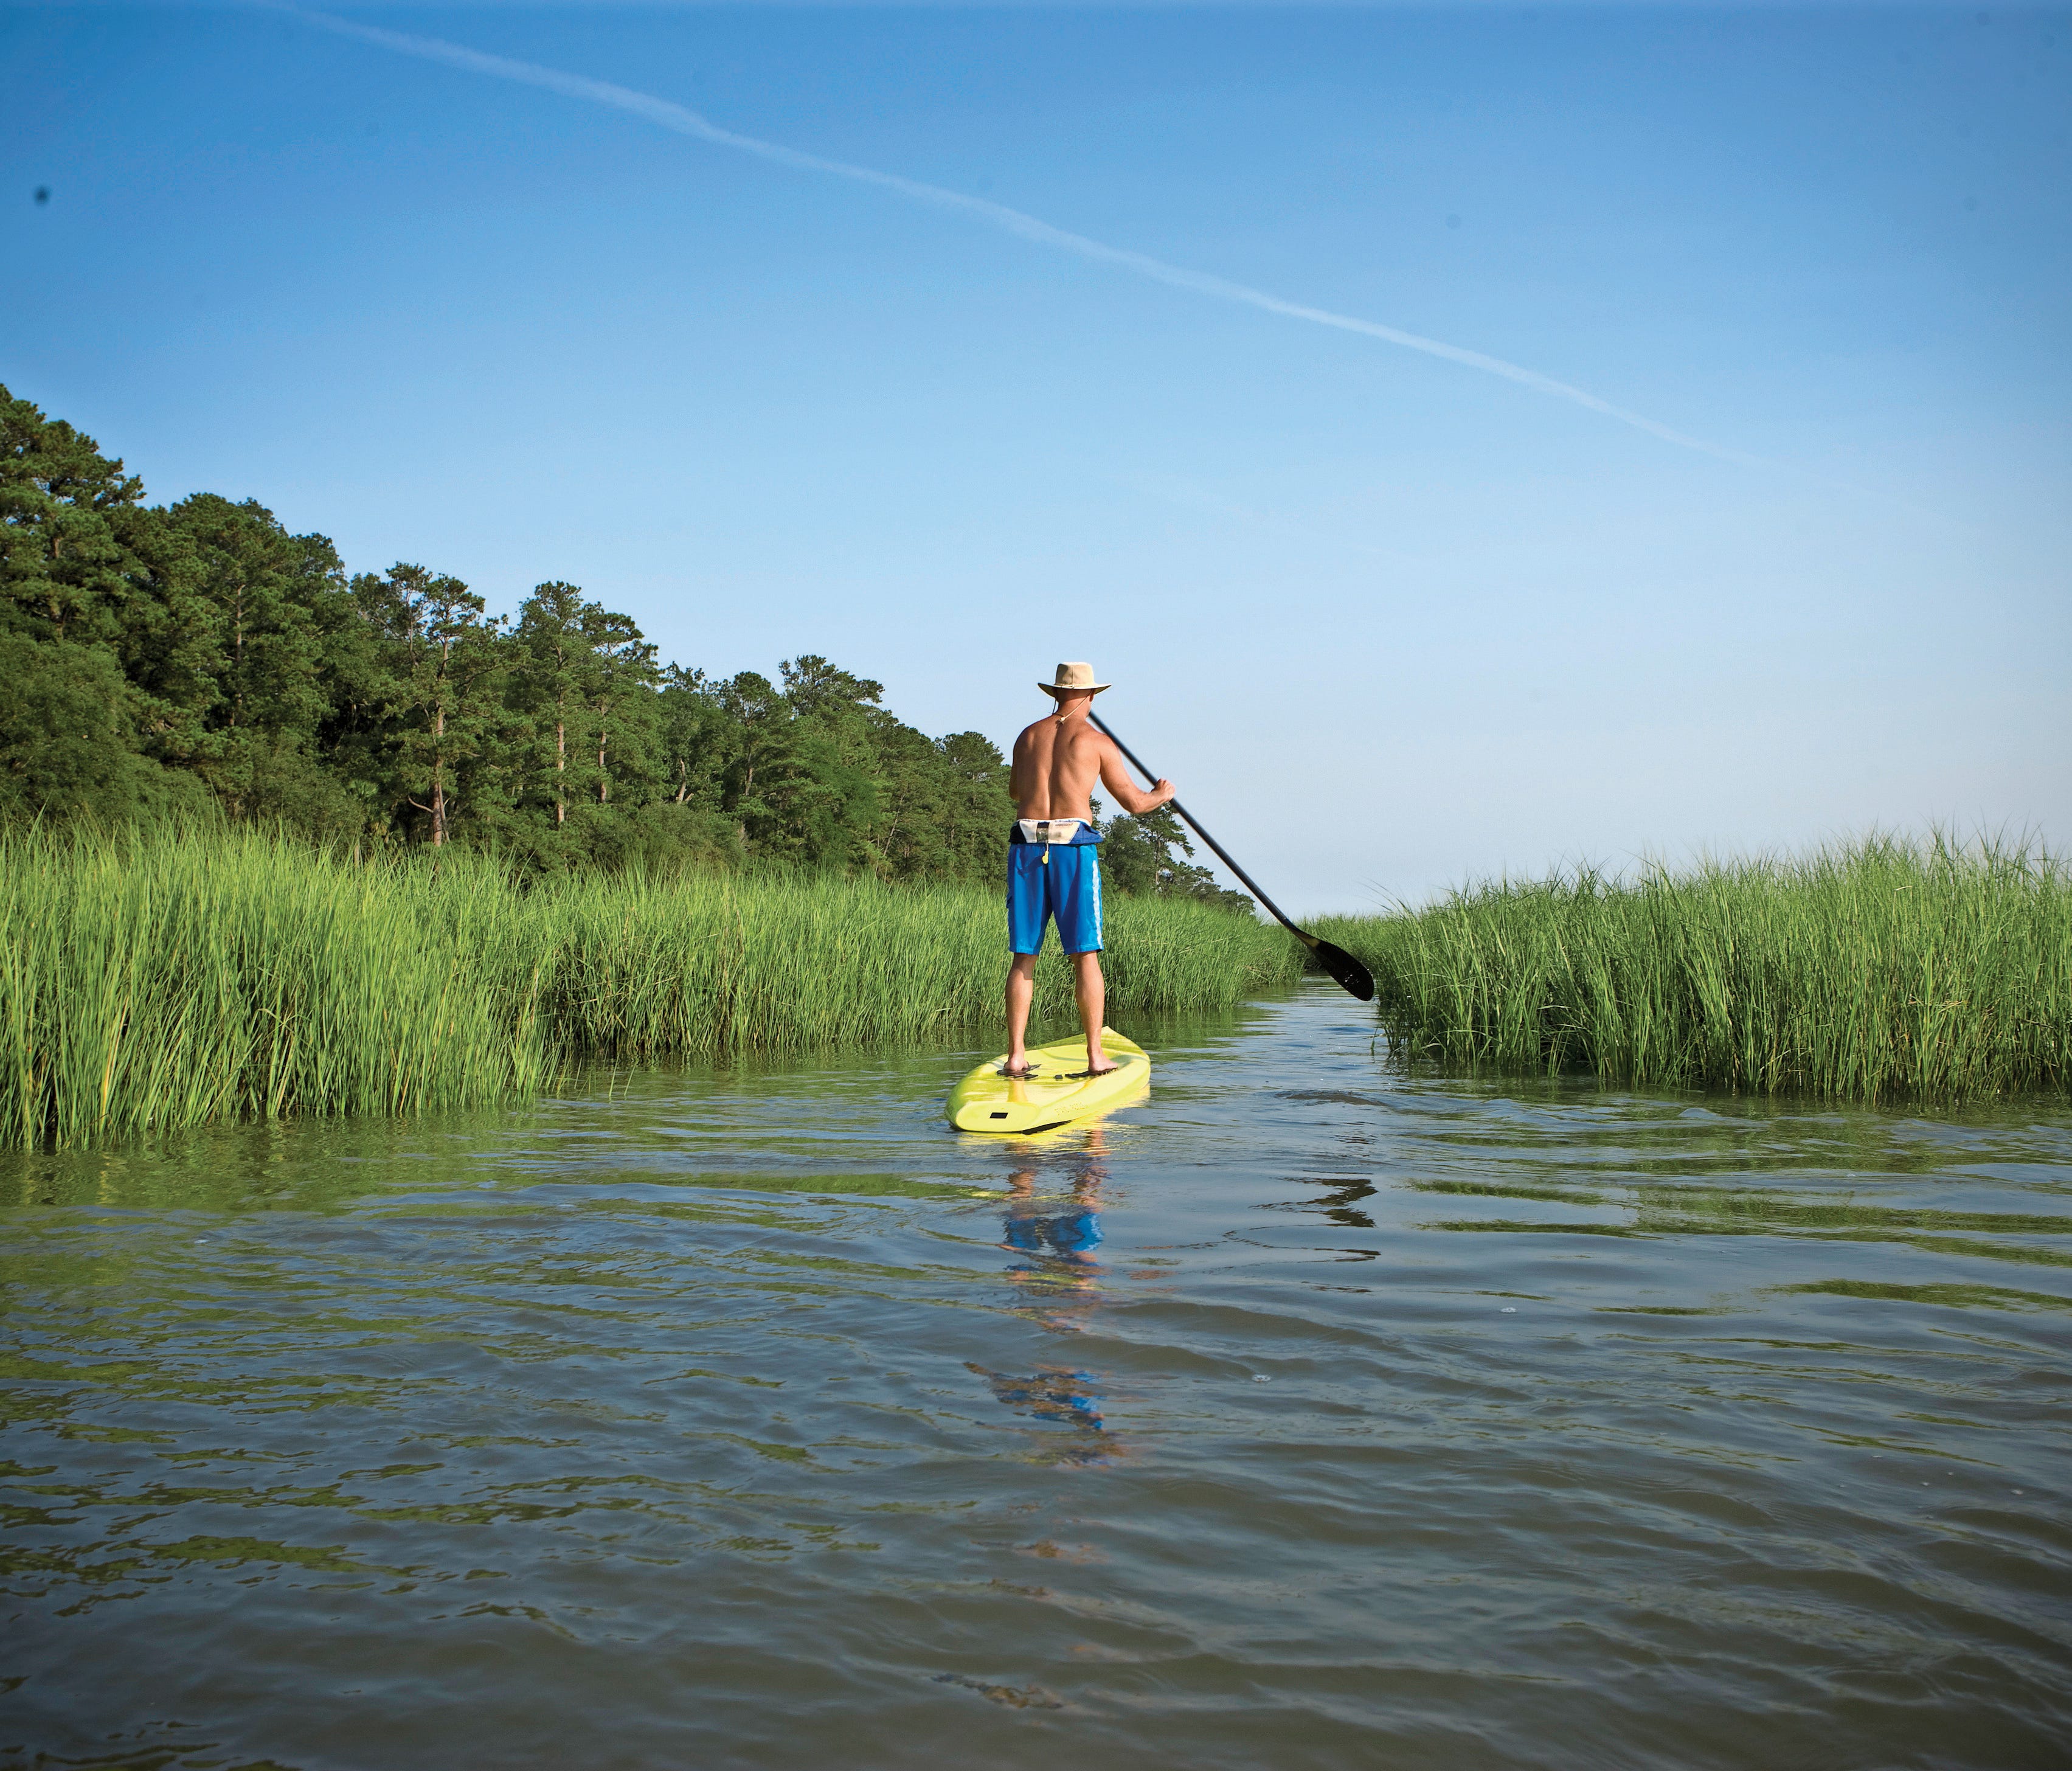 Meader on a paddleboard on the May River, in South Carolina's small but spectacular Bluffton.